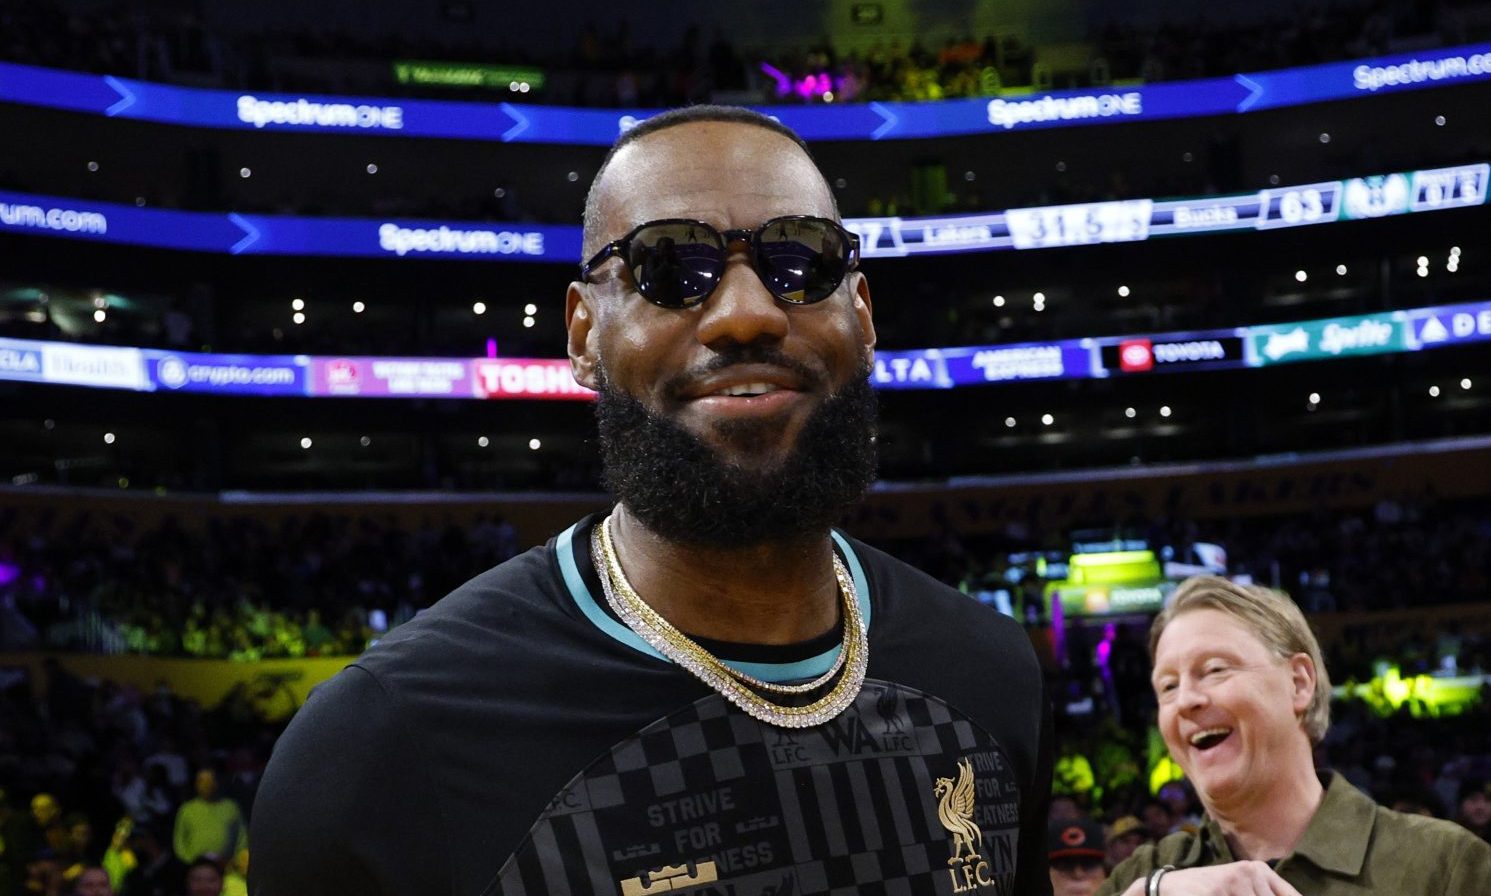 Wayment! Social Media Goes Nuts Over LeBron James’ Courtside Interaction With Lakers Owner Jeanie Buss thumbnail